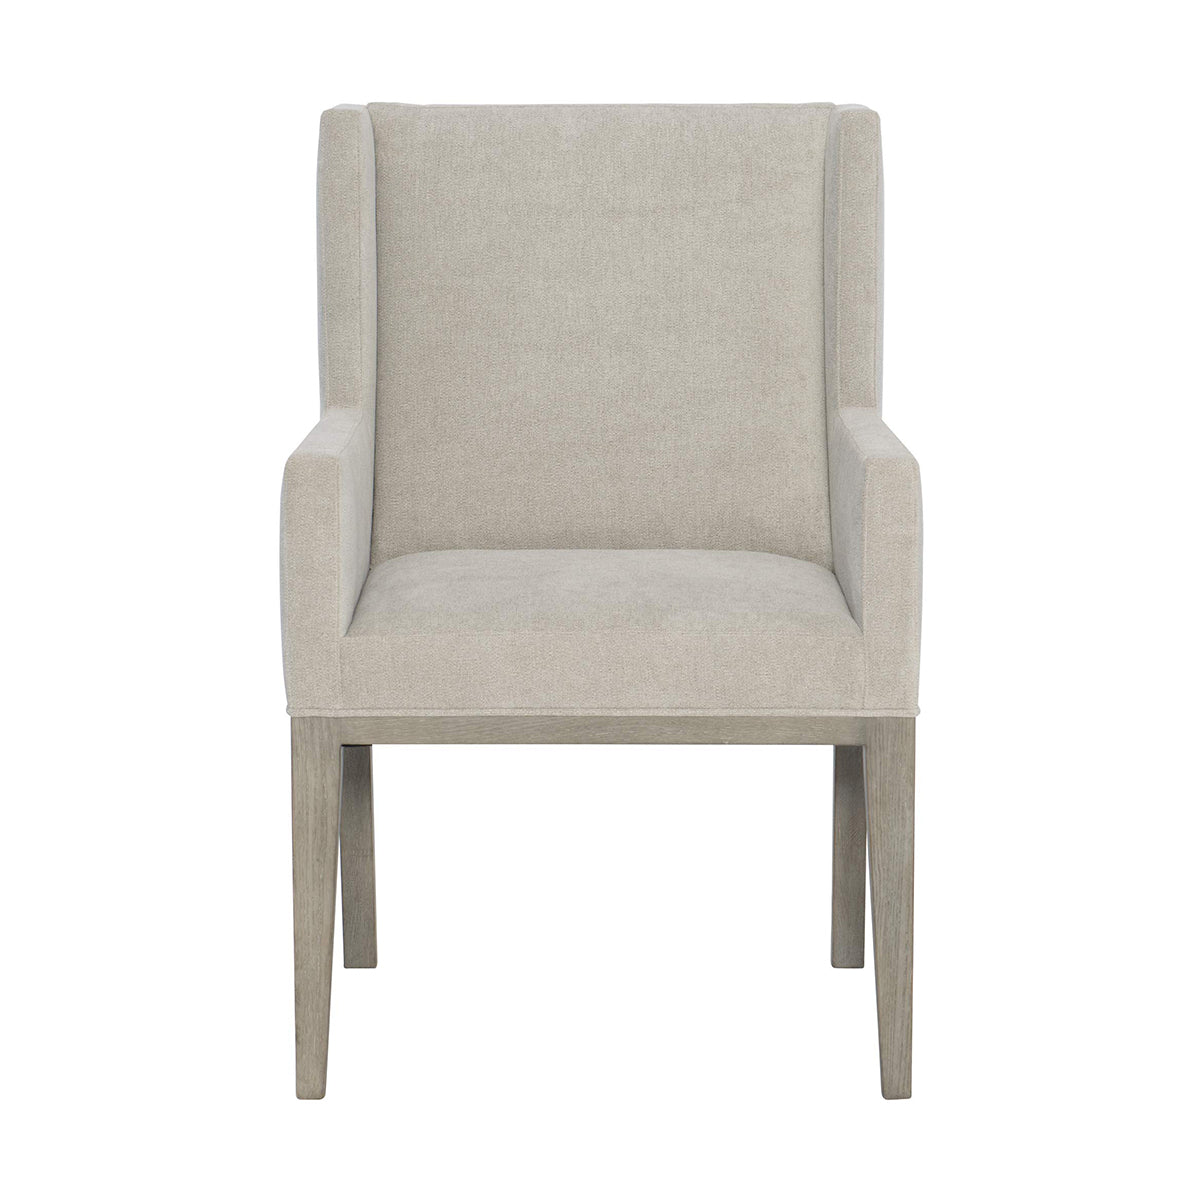 LINEA UPHOLSTERED ARM CHAIR